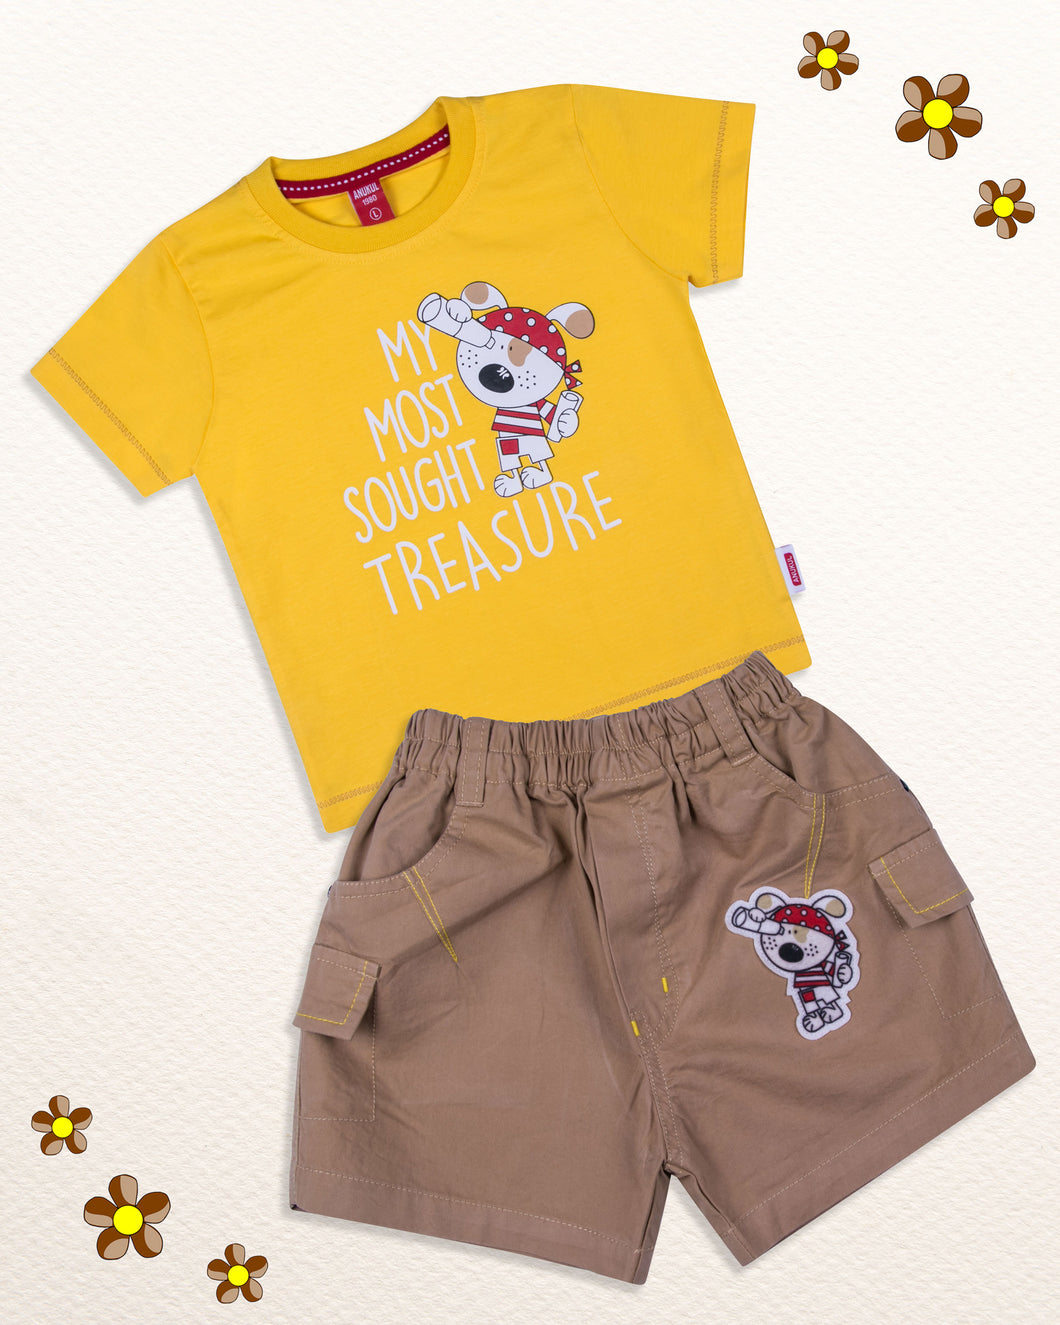 Boys Solid Printed Yellow Baba Suit